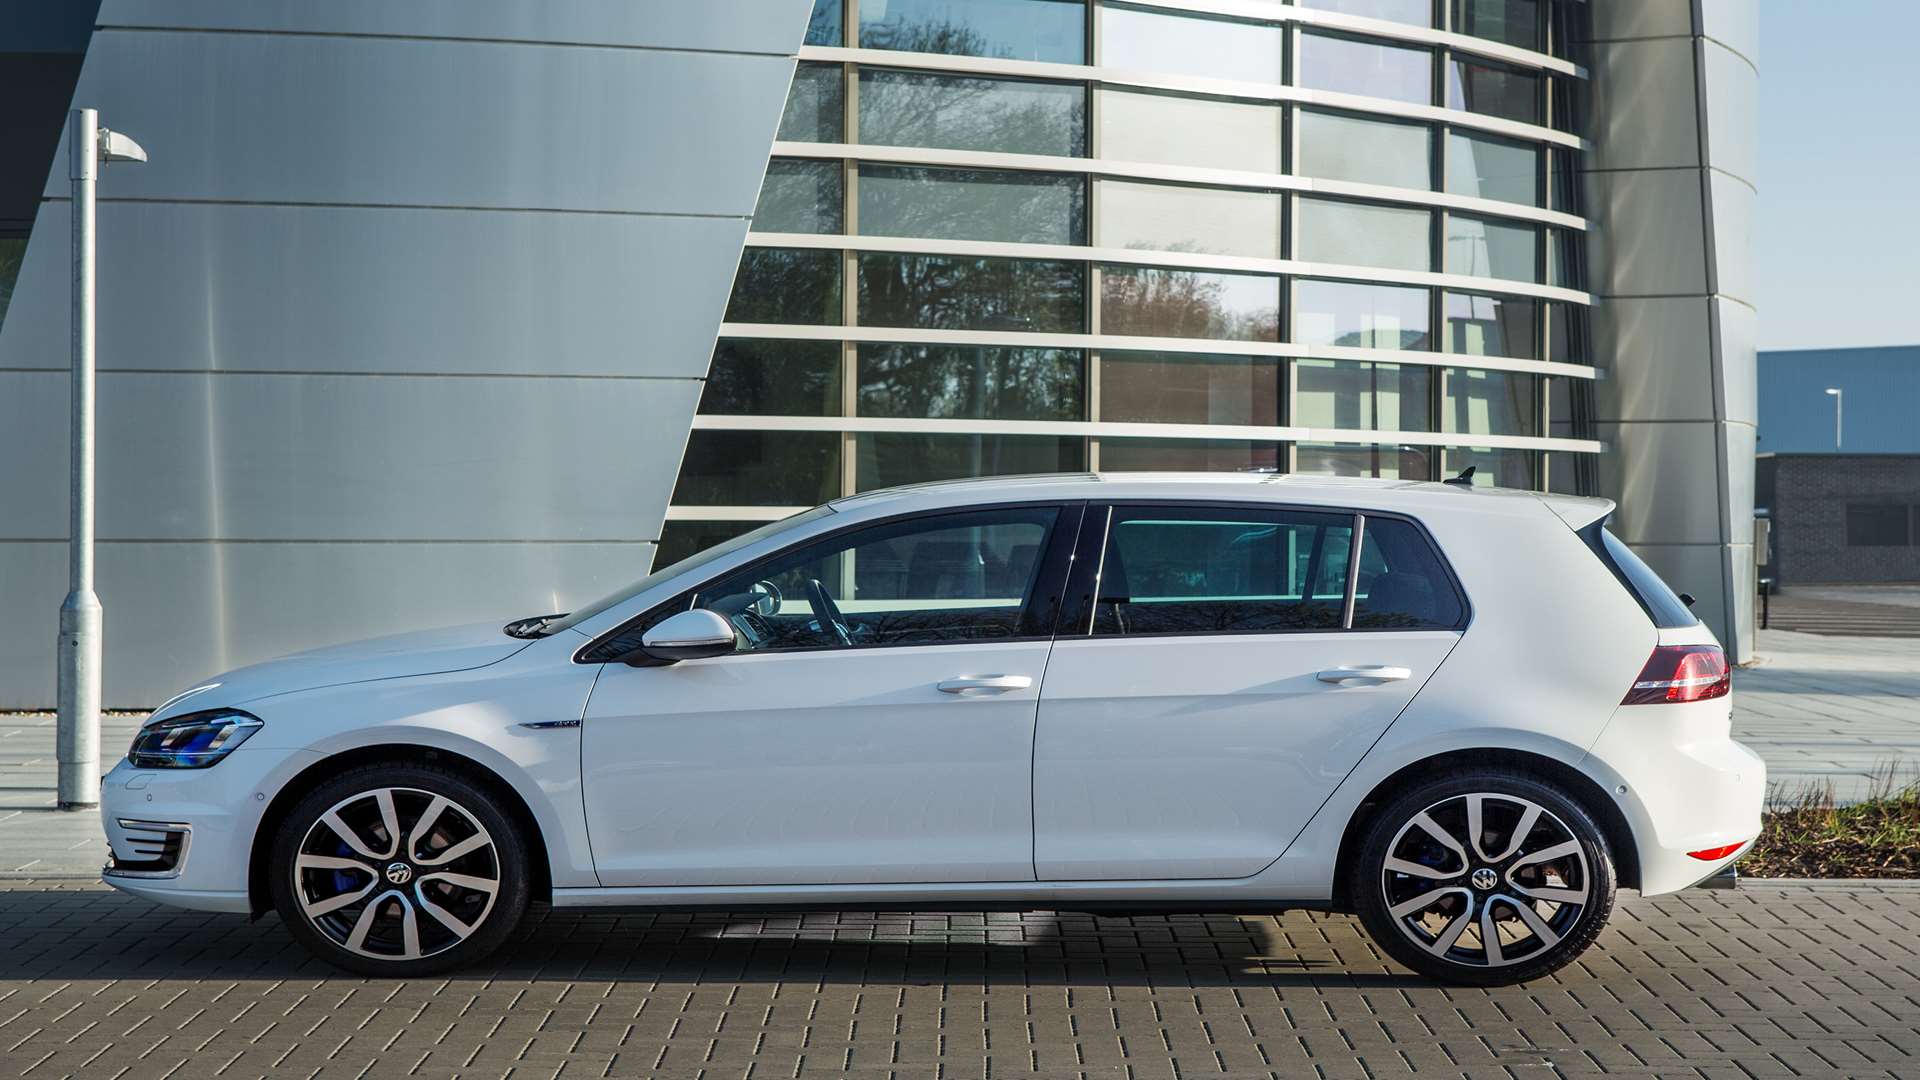 It's unmistakably a Golf